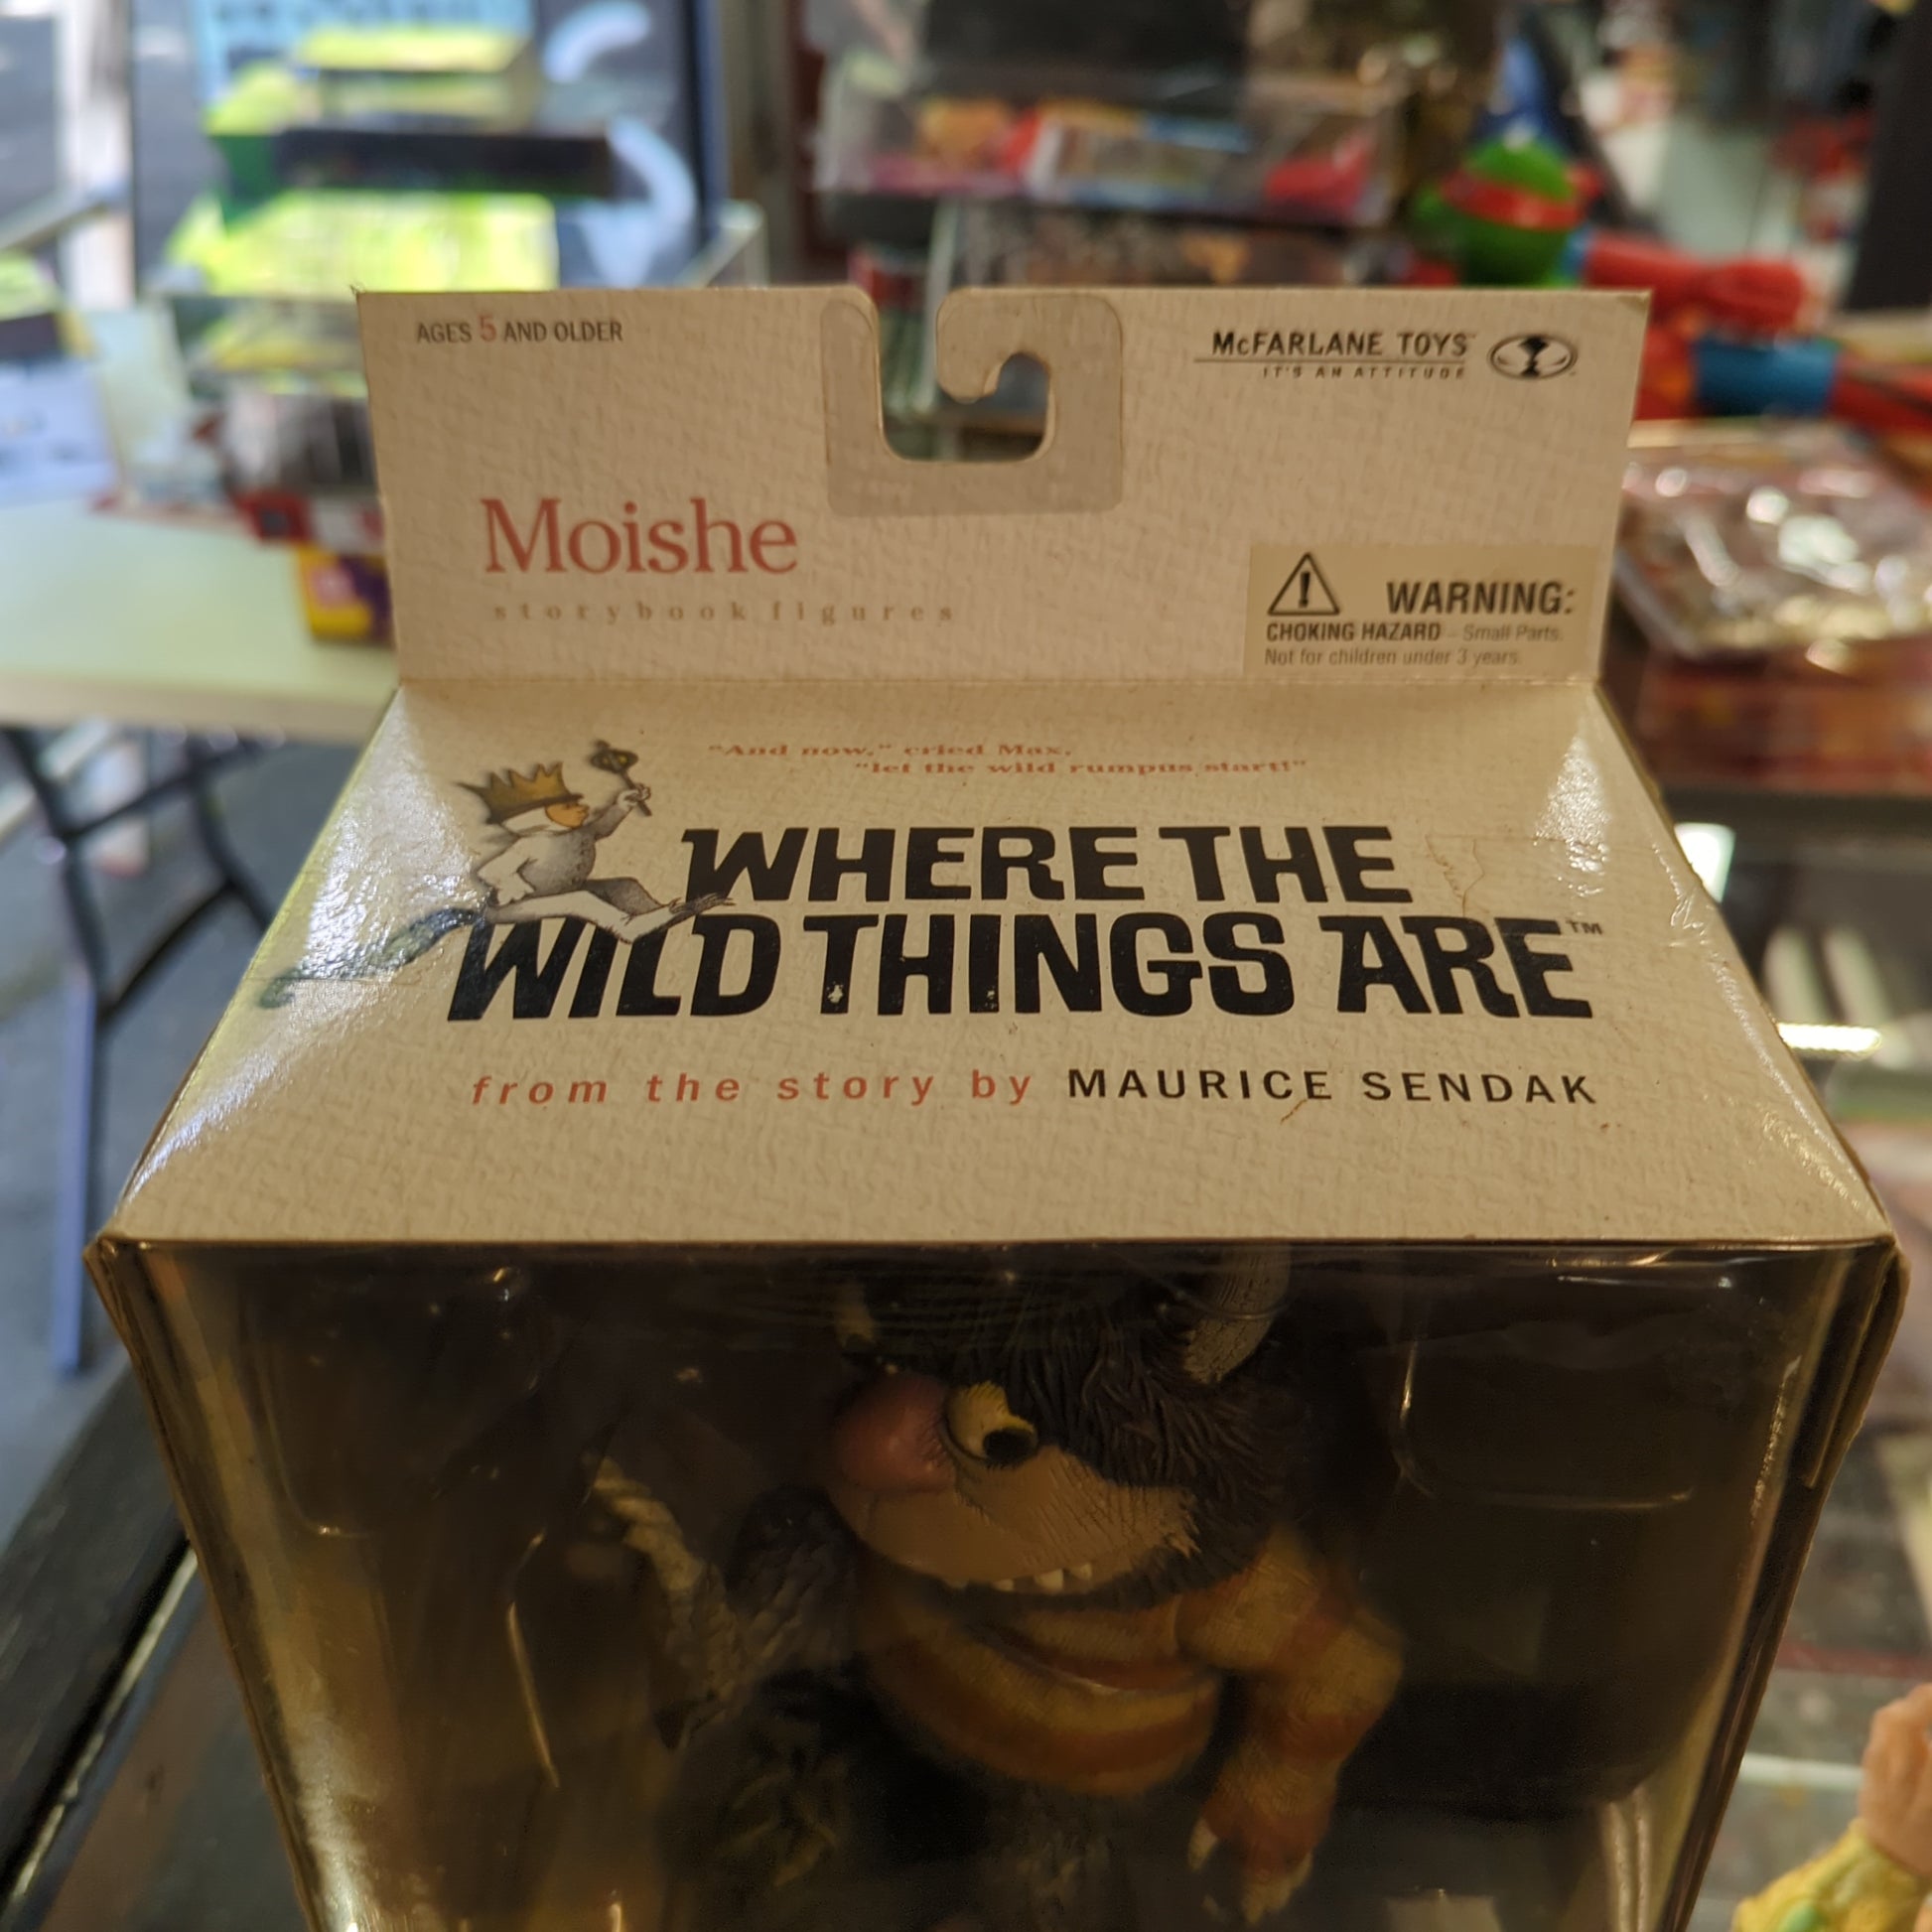 Moishe Figure Where The Wild Things Are 2000 McFarlane Toys Brand New in Box FRENLY BRICKS - Open 7 Days